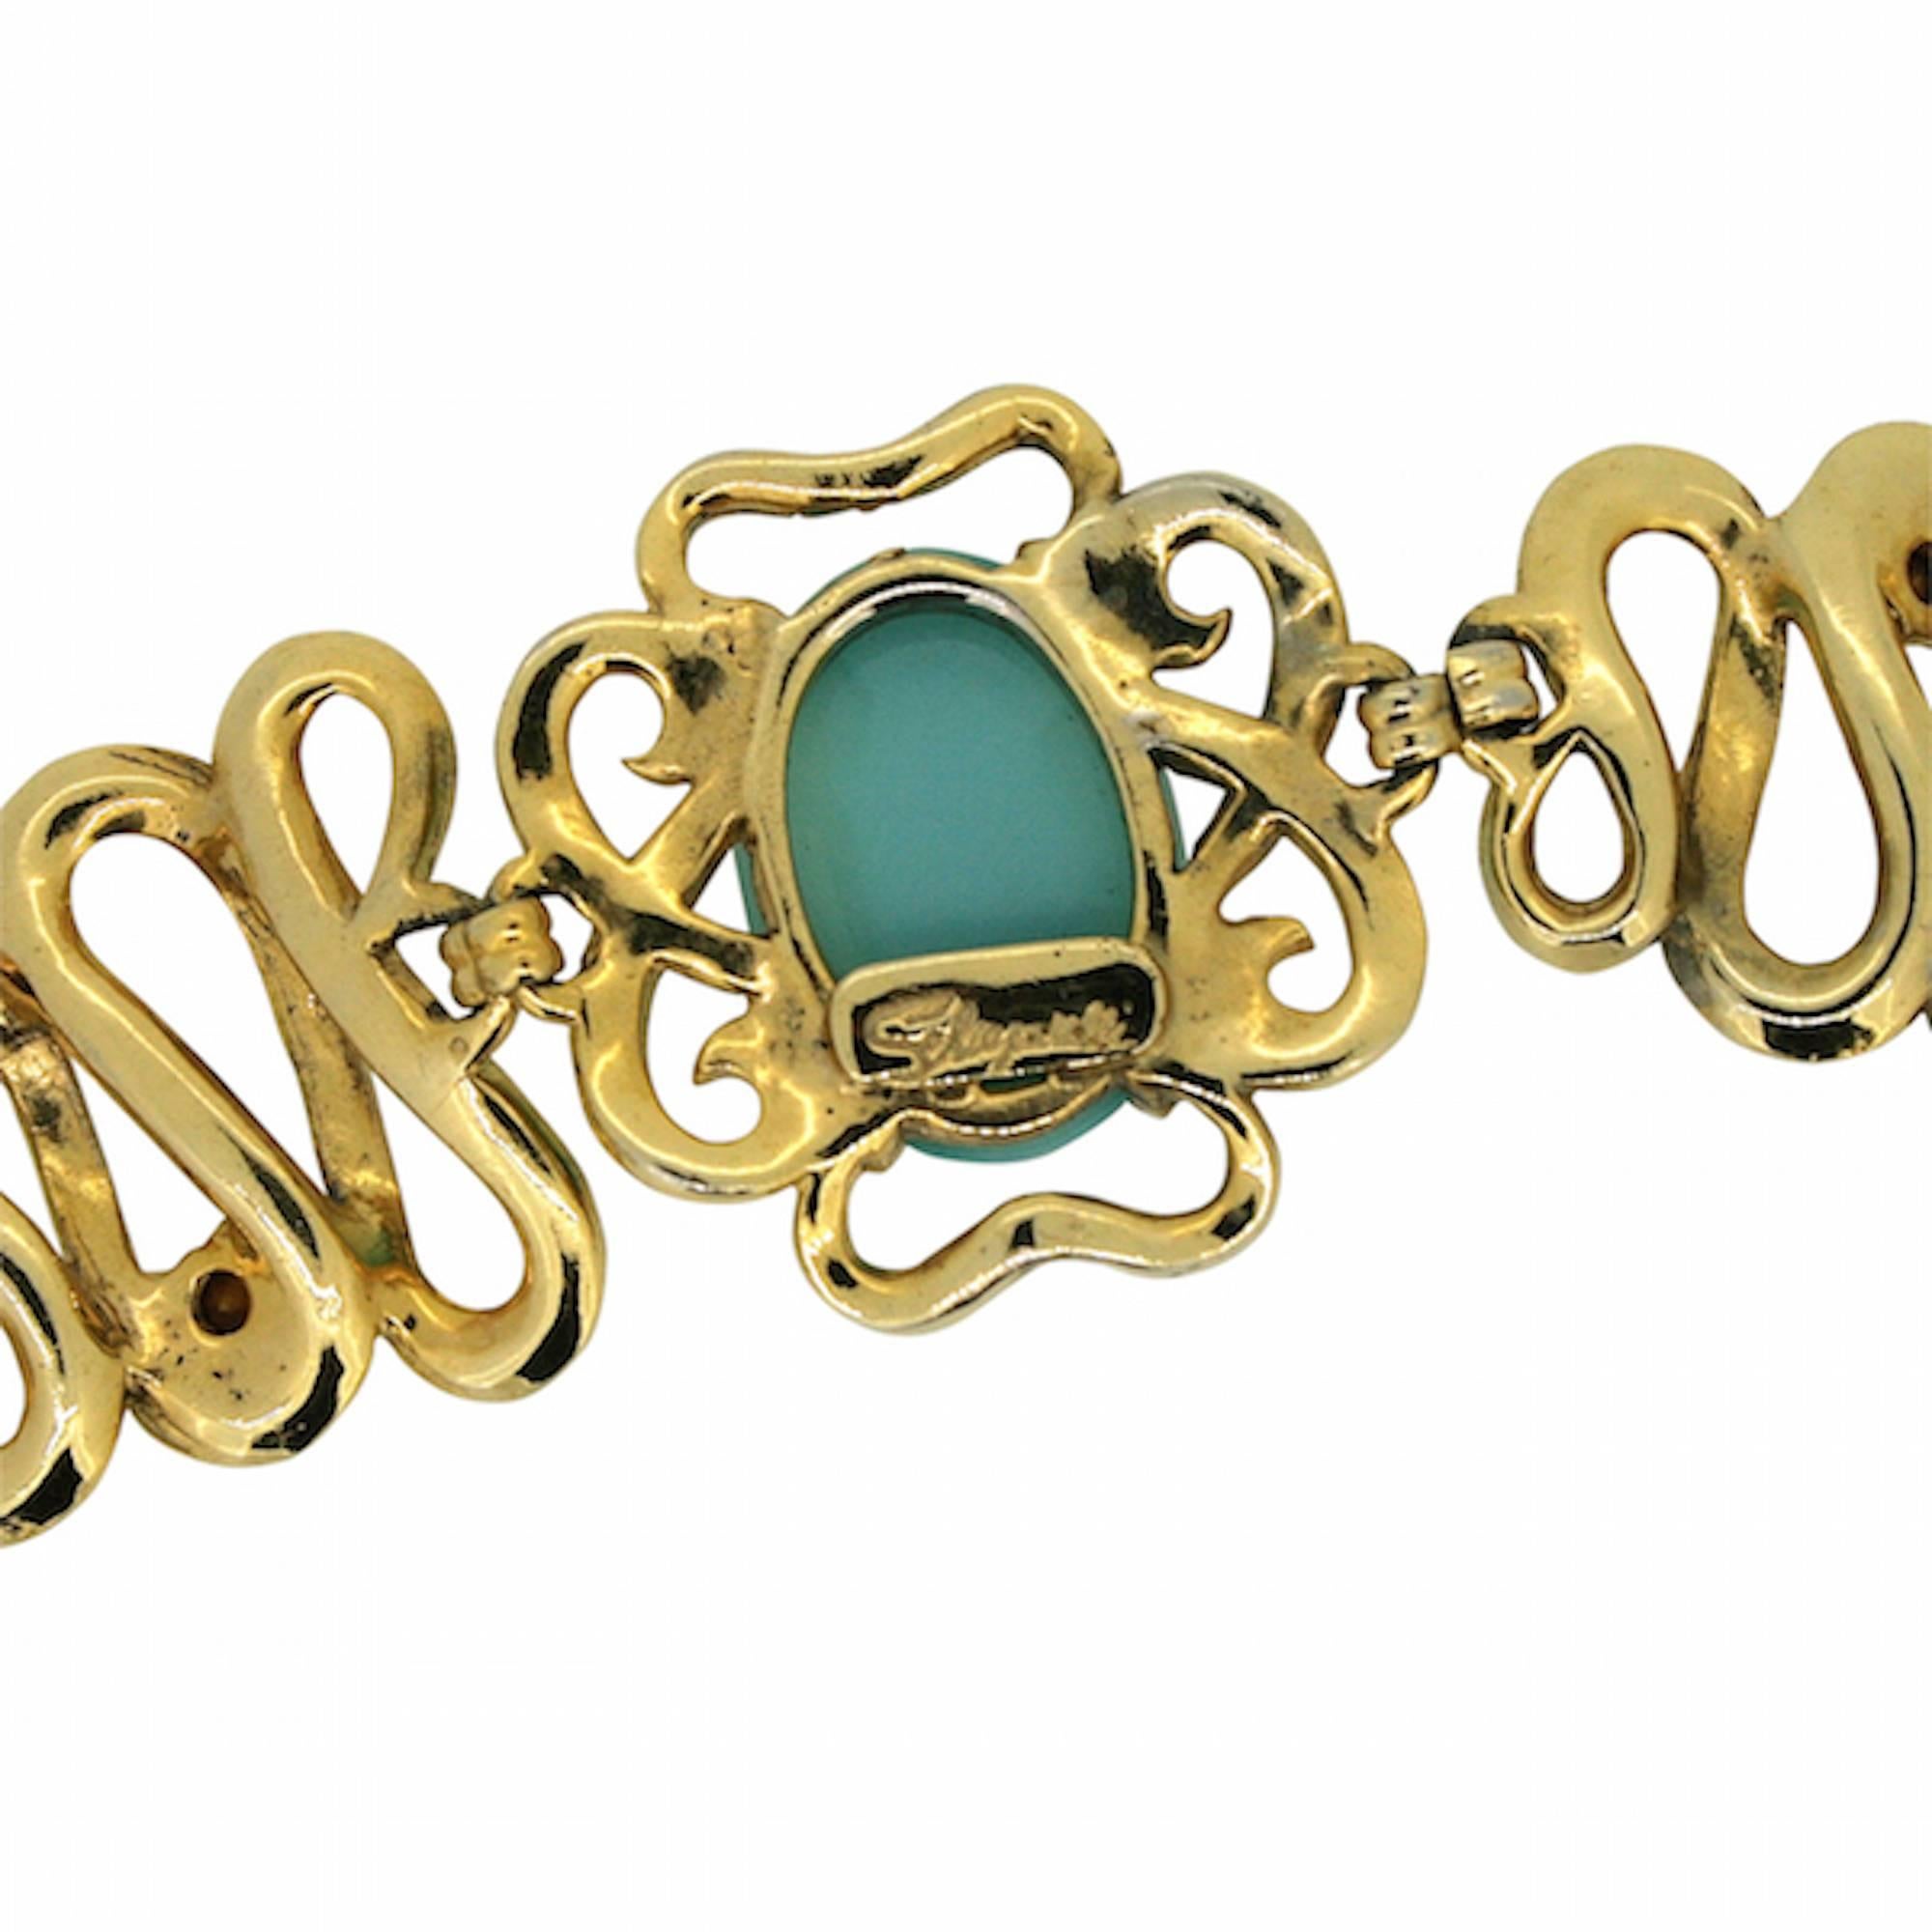 Schiaparelli 1950s Vintage Turquoise Glass Bracelet In Good Condition For Sale In Wigan, GB